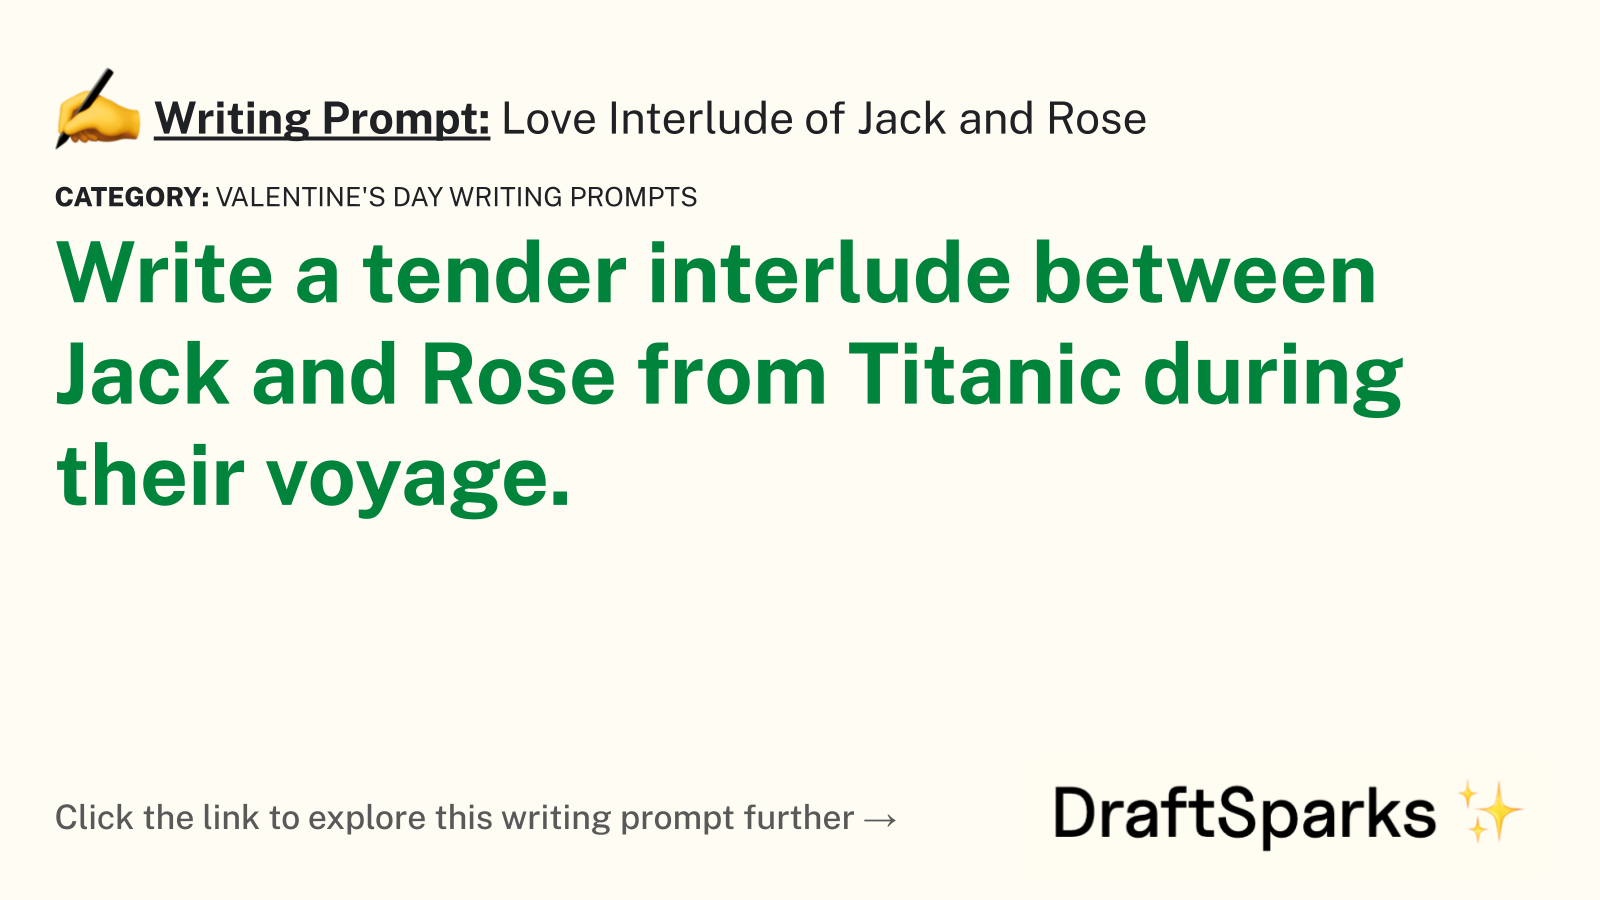 Love Interlude of Jack and Rose